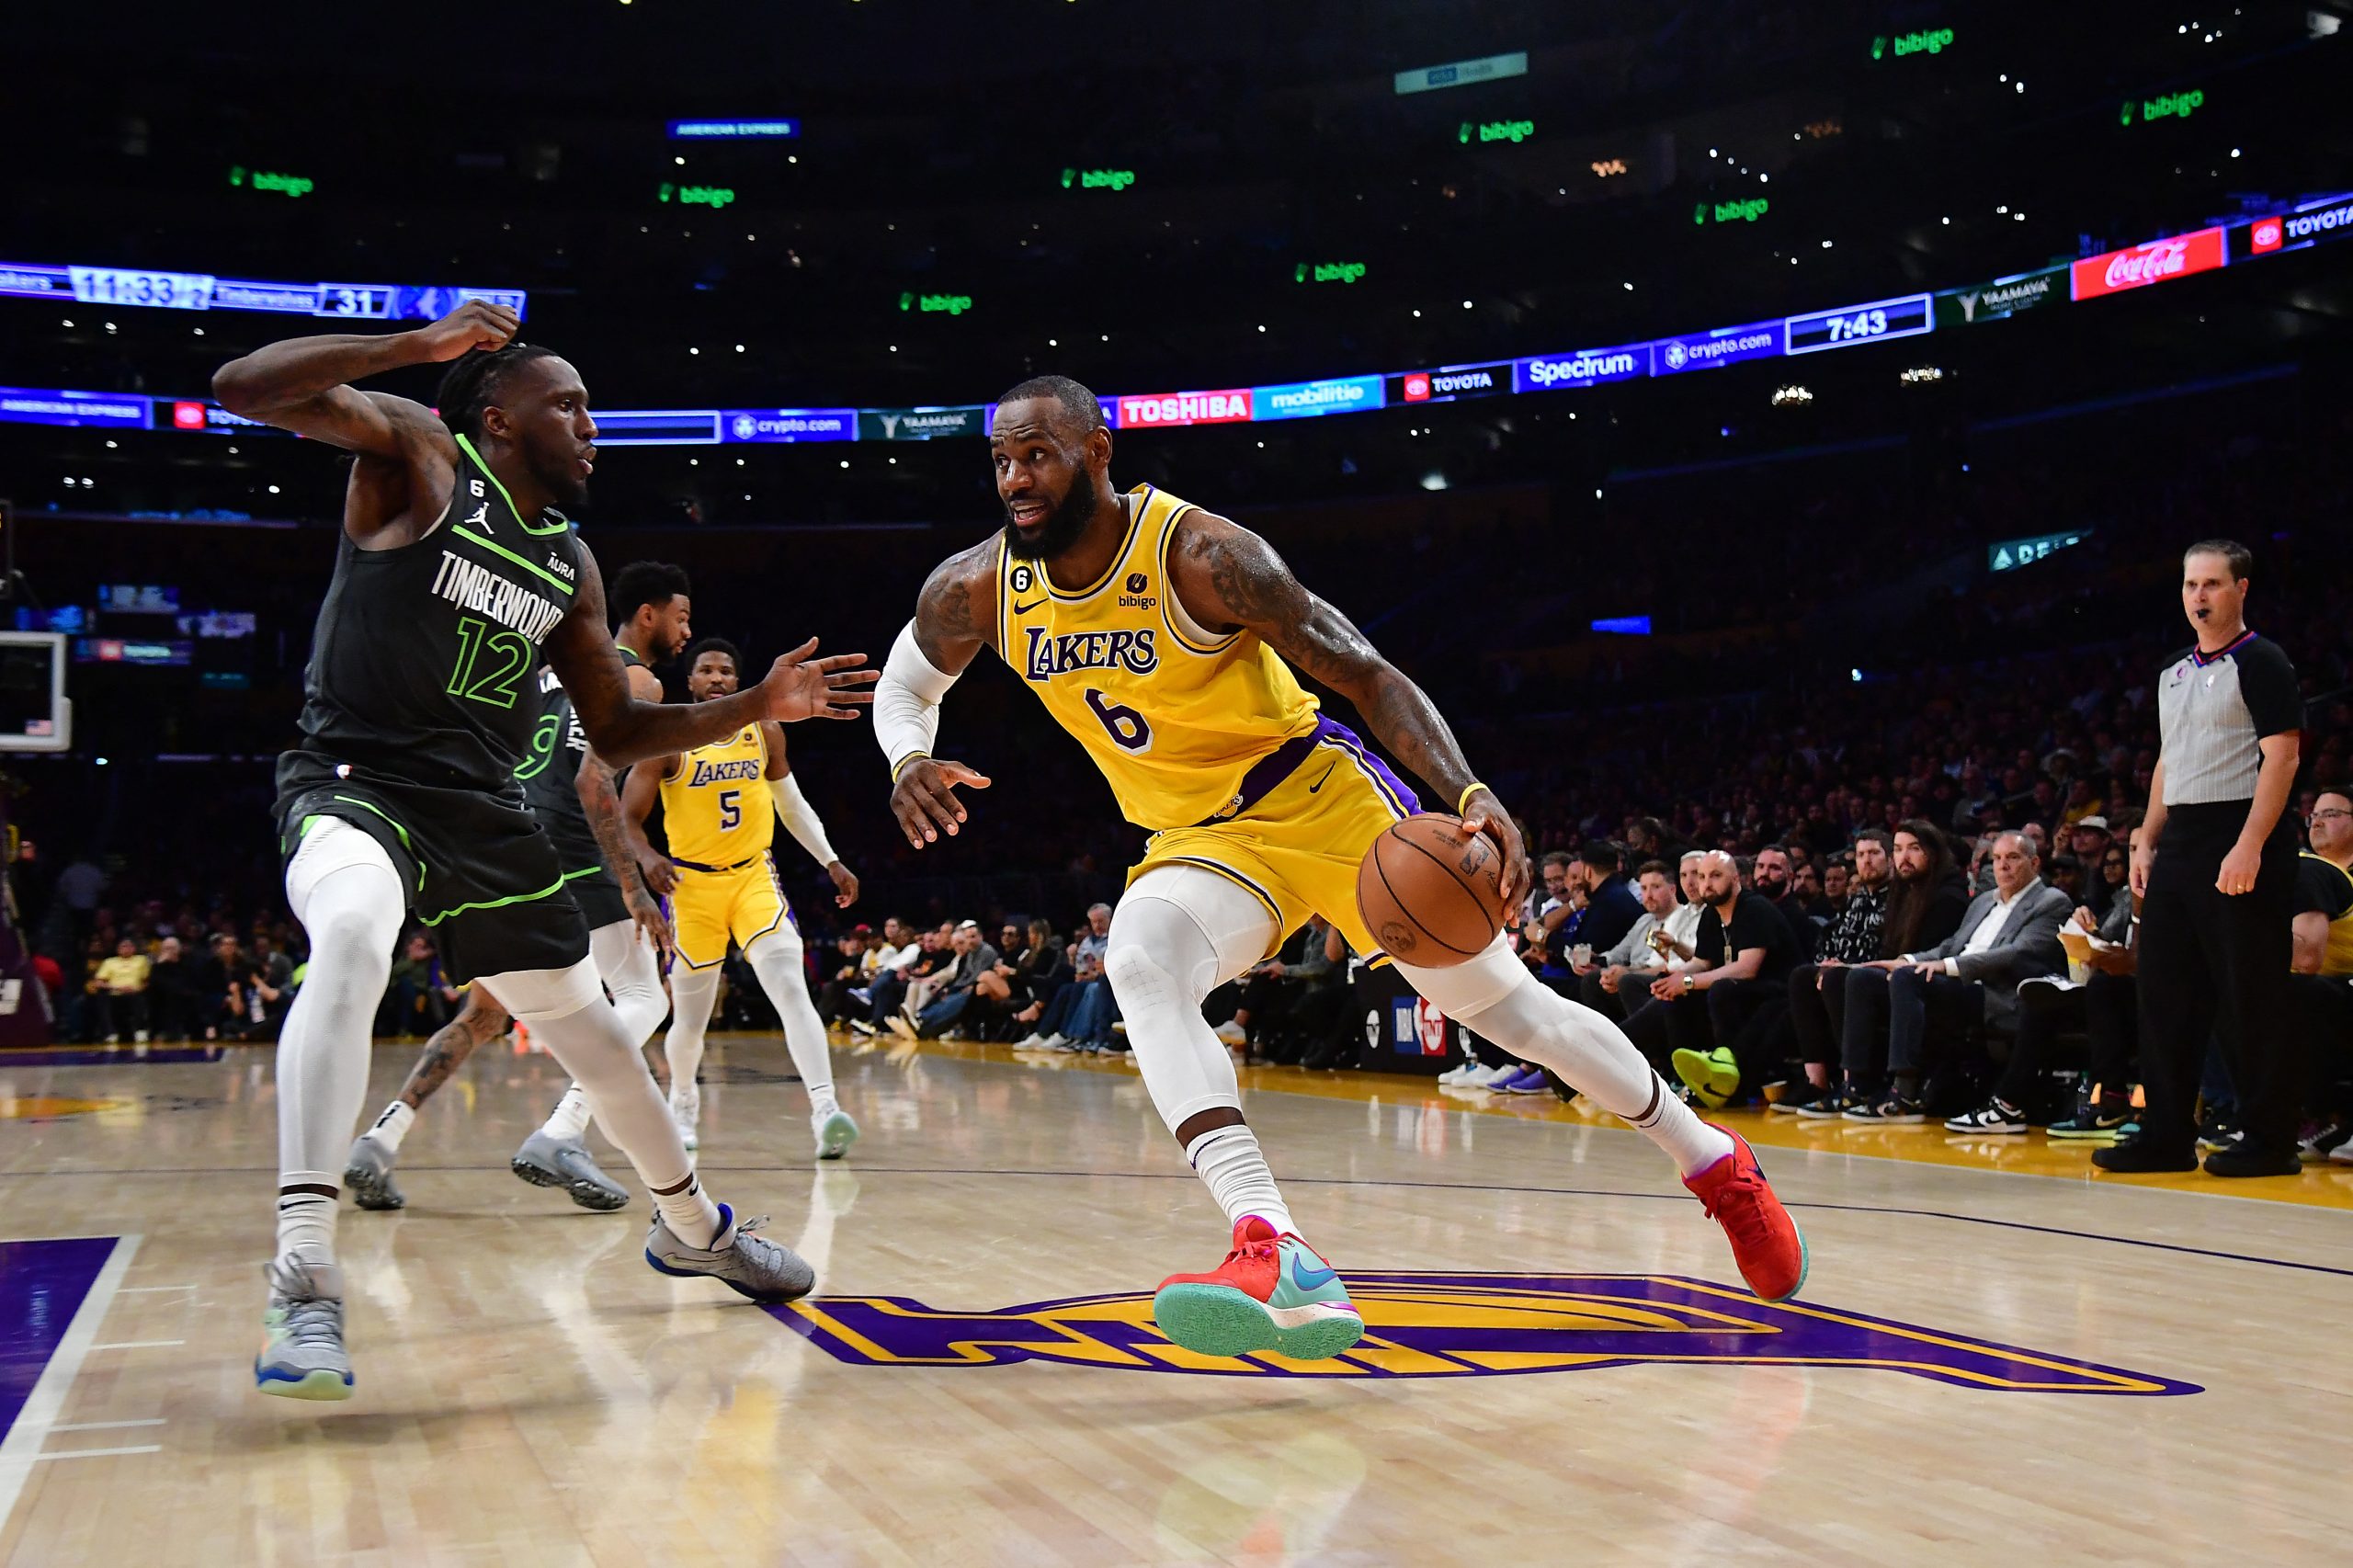 Apr 11, 2023; Los Angeles, California, USA; Los Angeles Lakers forward LeBron James (6) moves to the basket against Minnesota Timberwolves forward Taurean Prince (12) during the first half at Crypto.com Arena. Mandatory Credit: Gary A. Vasquez-USA TODAY Sports Photo: Gary A. Vasquez/REUTERS